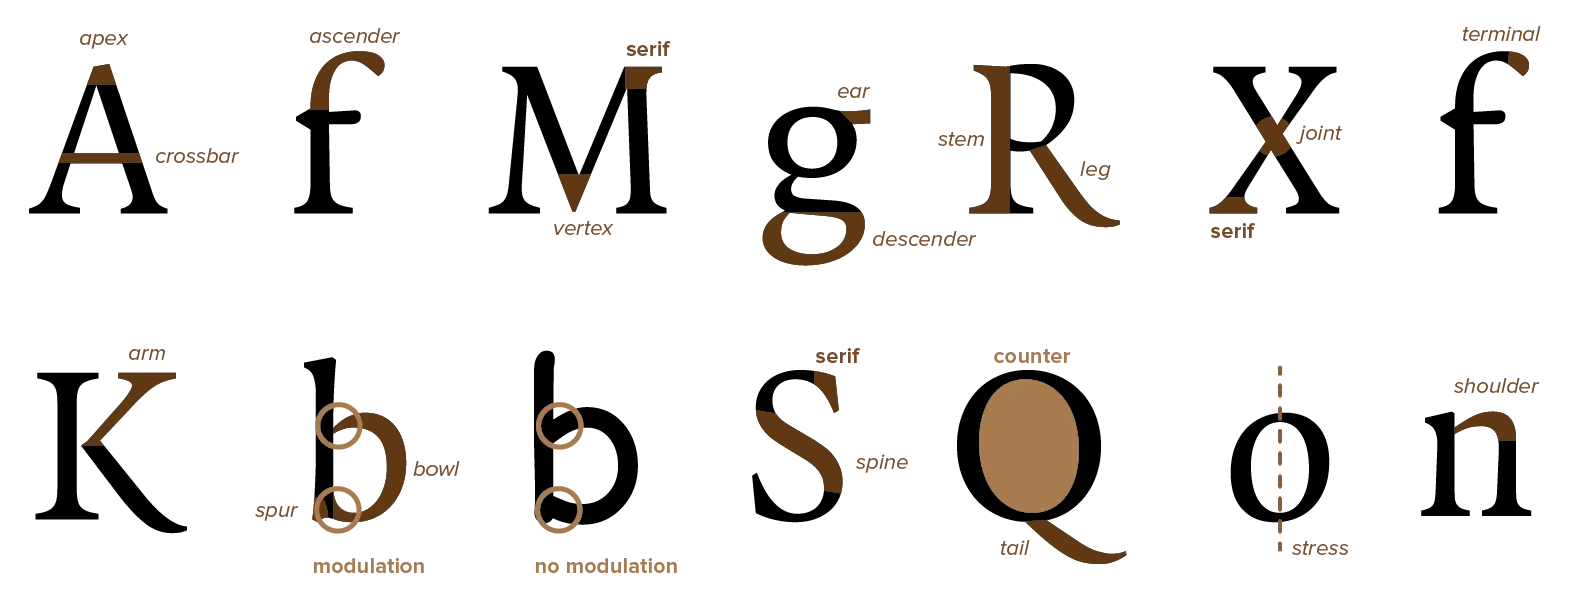 Names for common parts in letterforms.